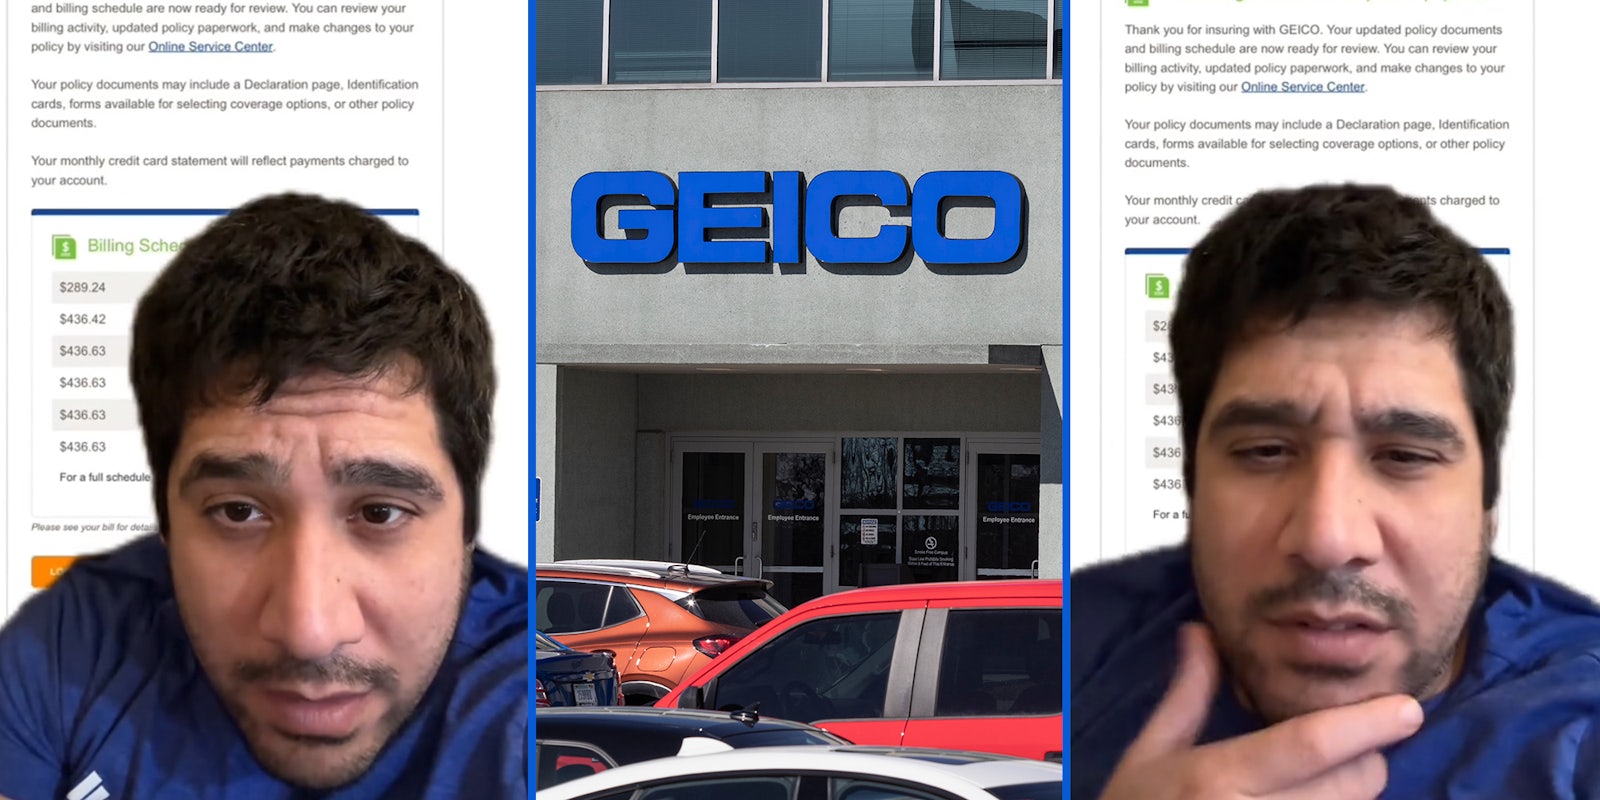 Man says Geico raised insurance from $289 to $436 for no reason